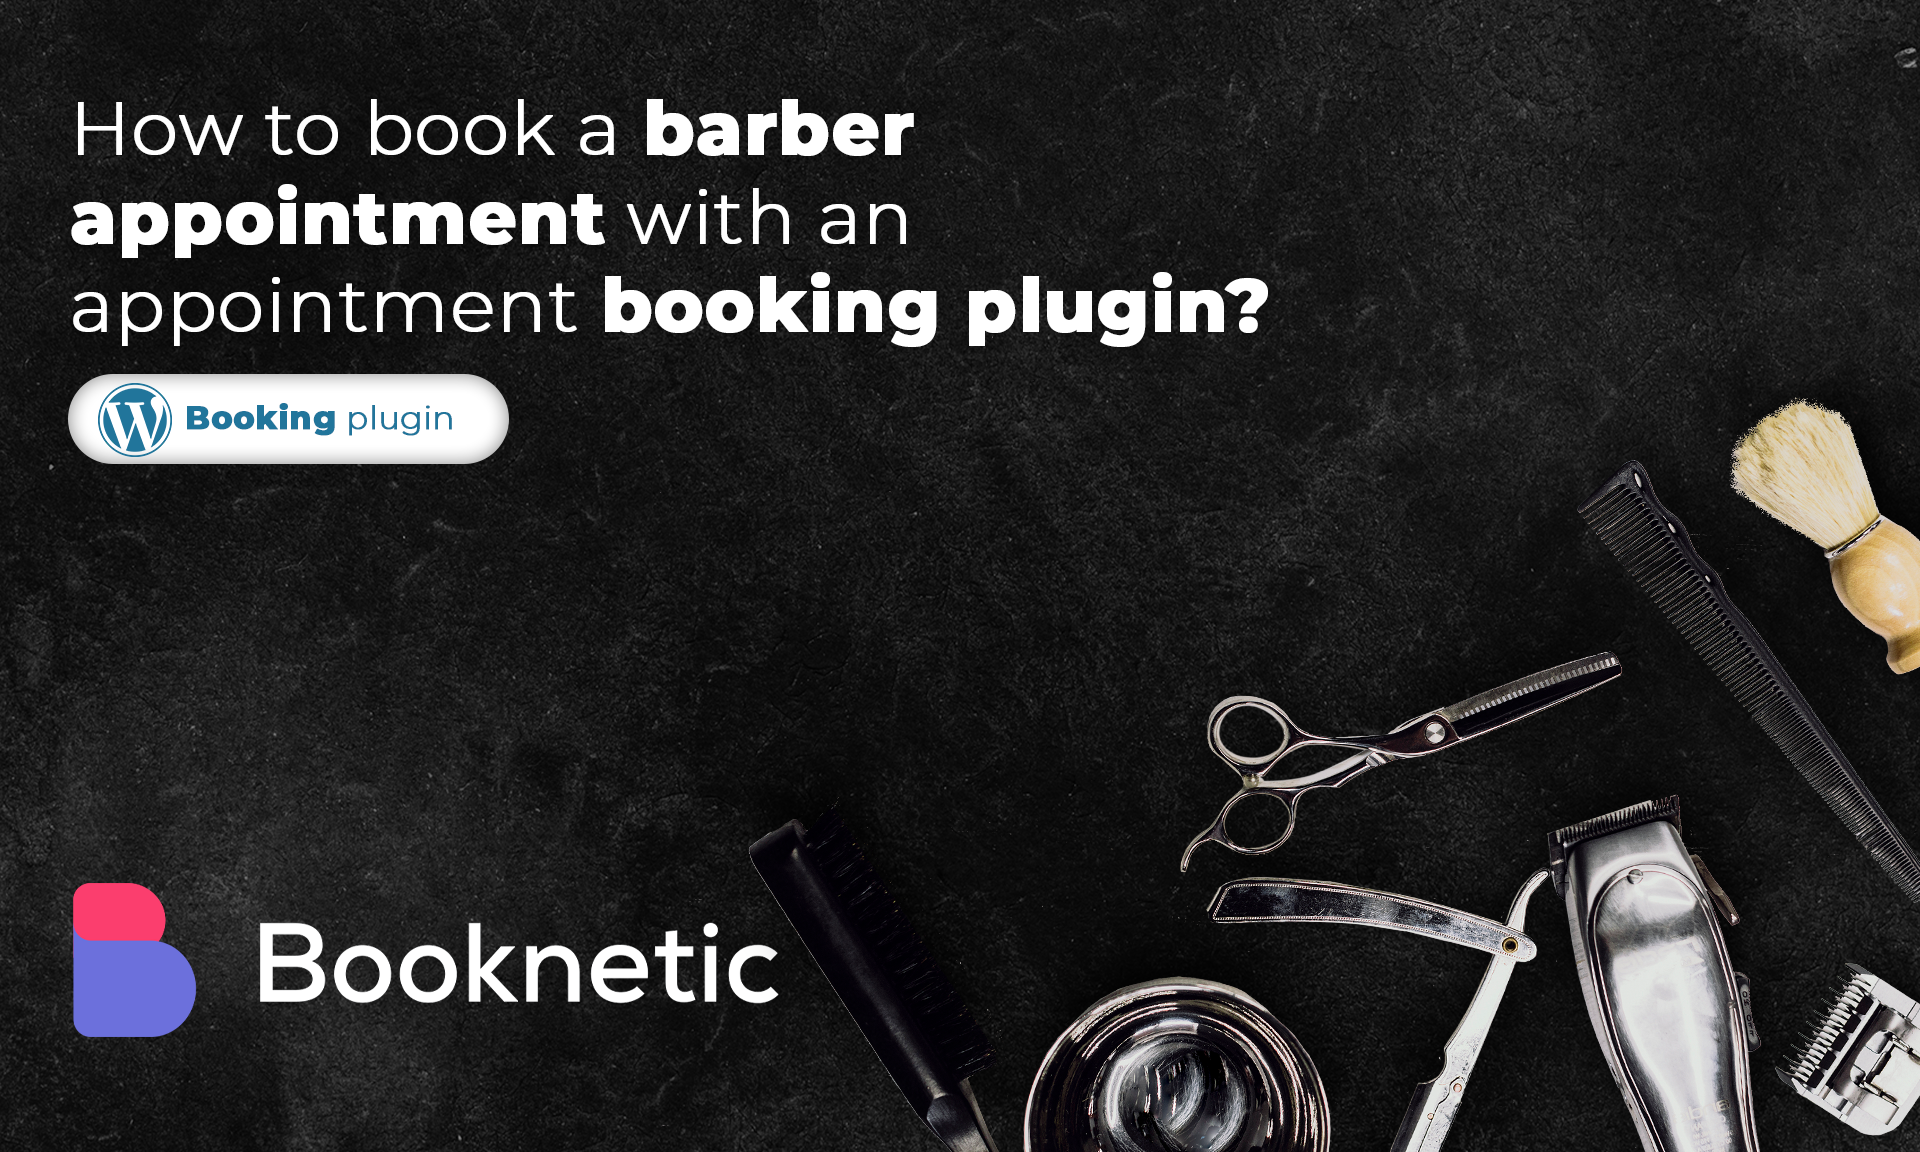 How to Book a Barber Appointment with an Appointment Booking Plugin?